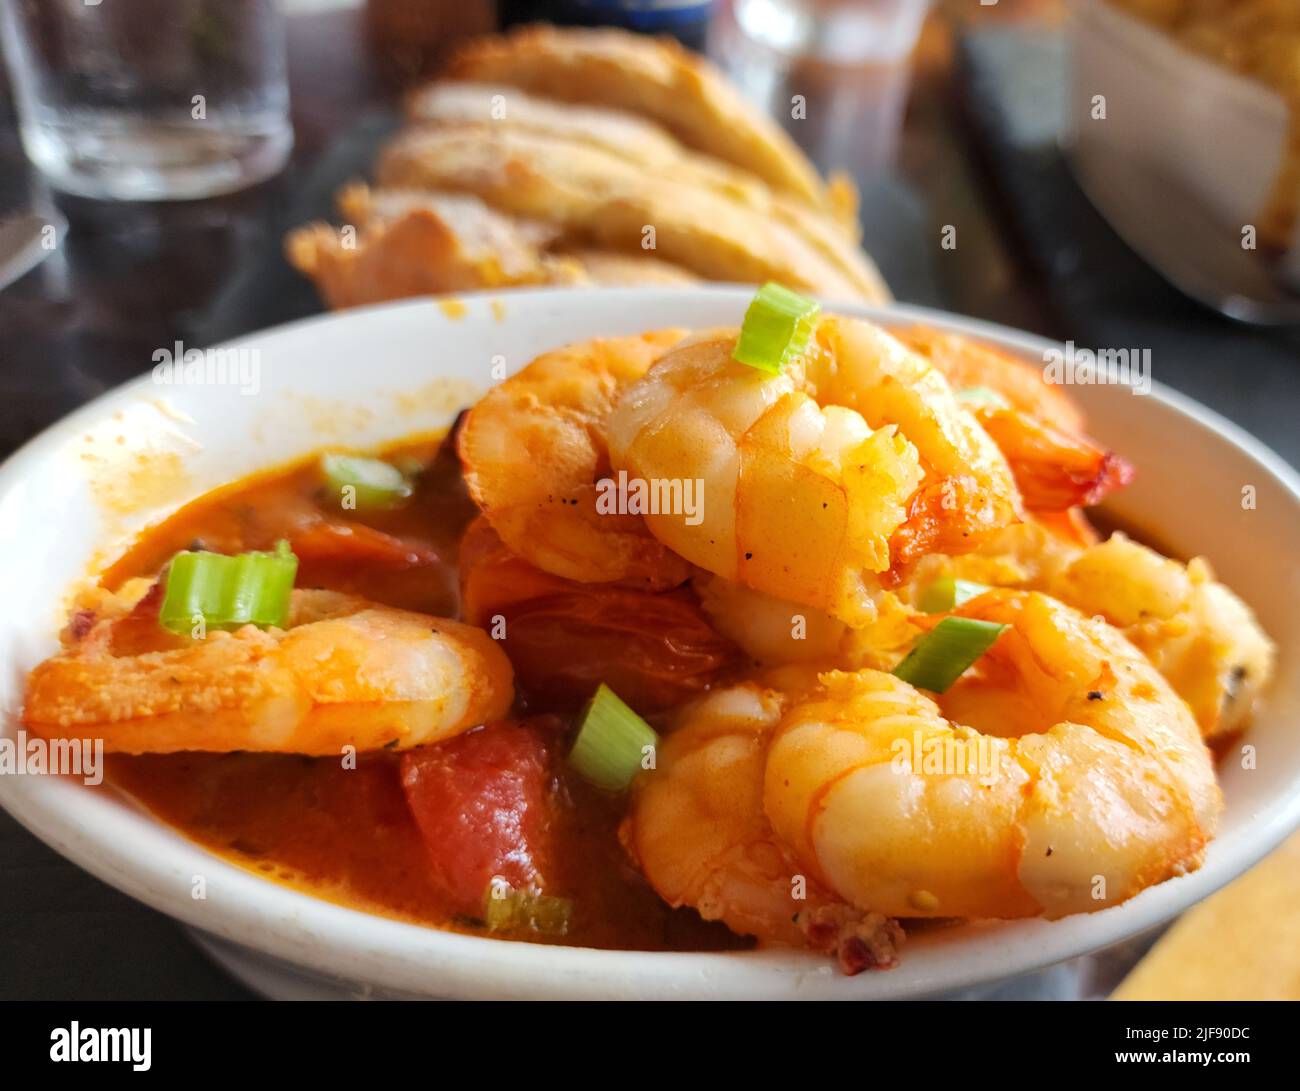 Garlic Shrimp with red sauce and green onions served in a white bowl with bread and a glass of water in the background. Stock Photo